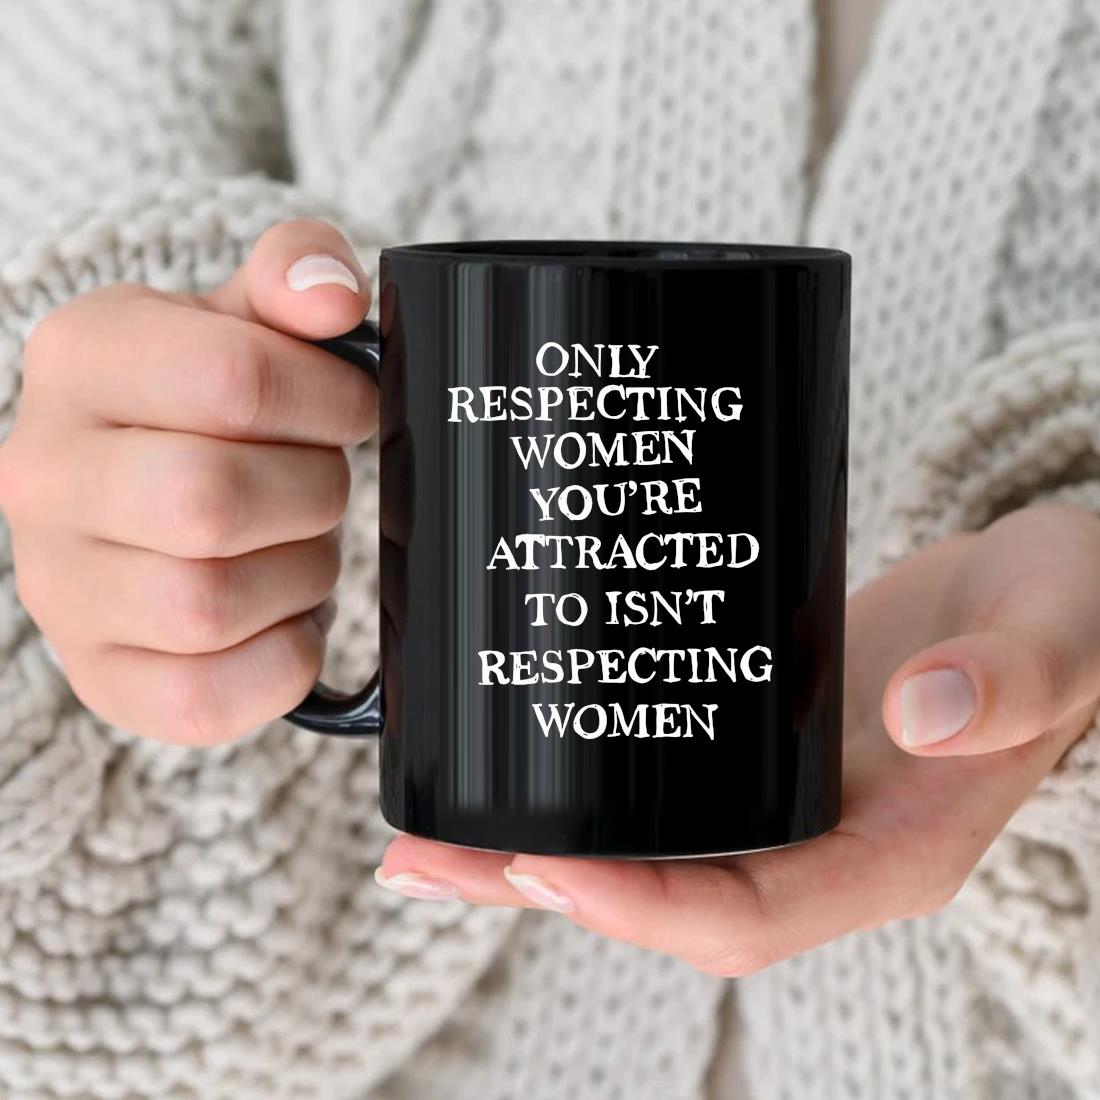 Only Respecting Women You're Attracted To Isn't Respecting Women Mug